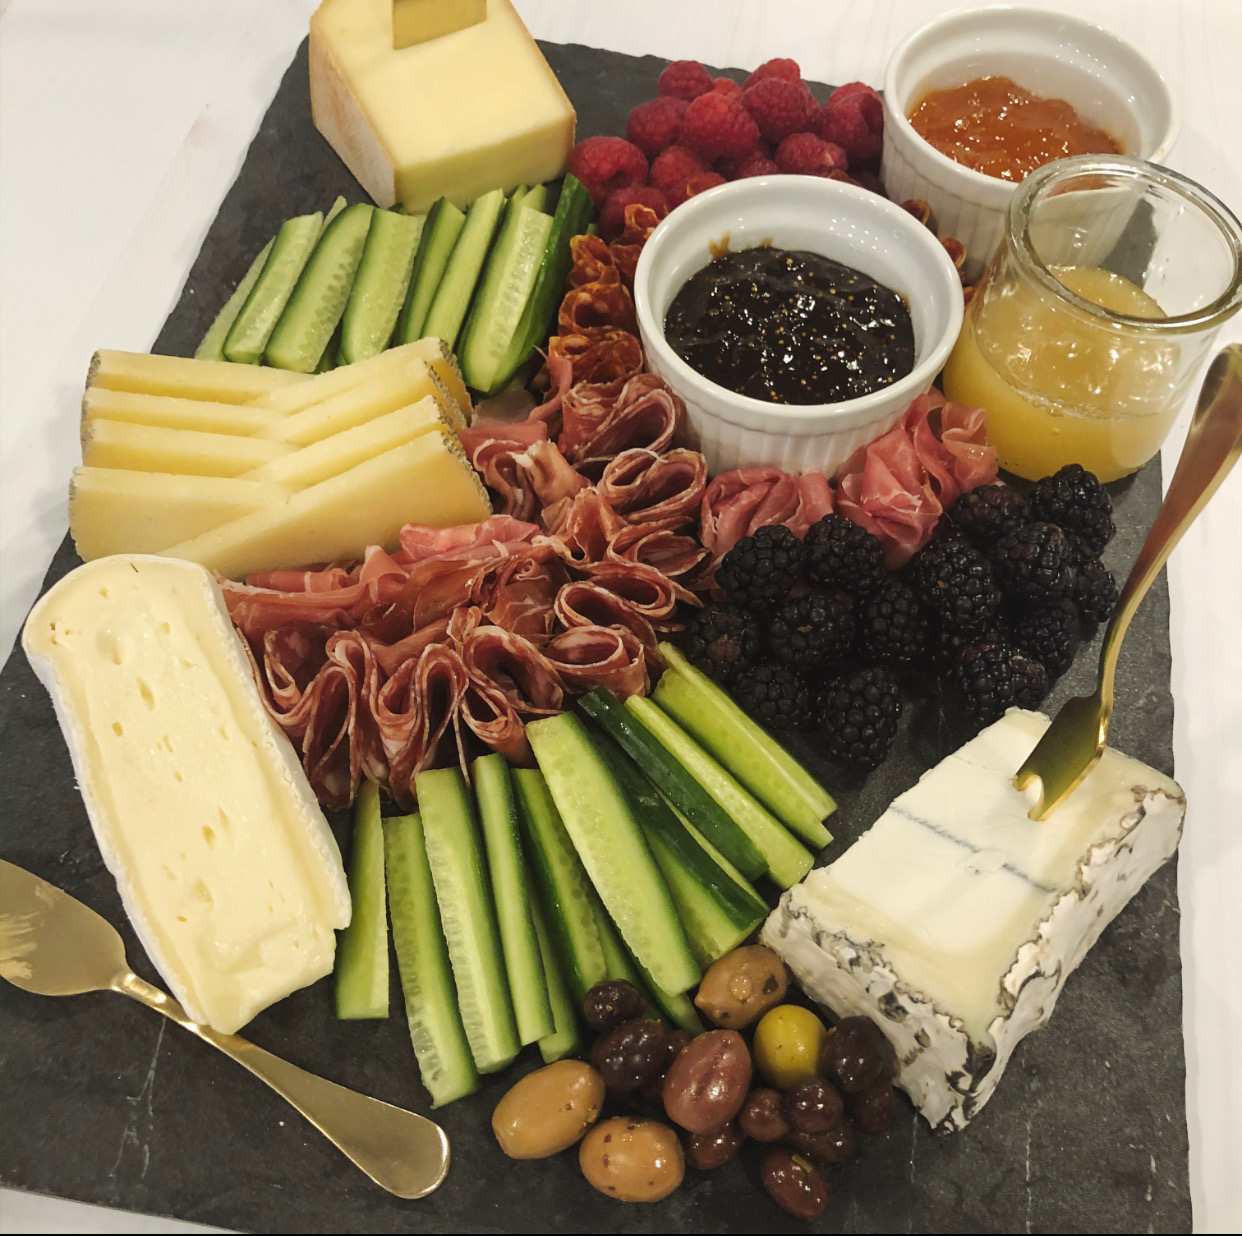 The finished Ultimate cheese board and charcuterie